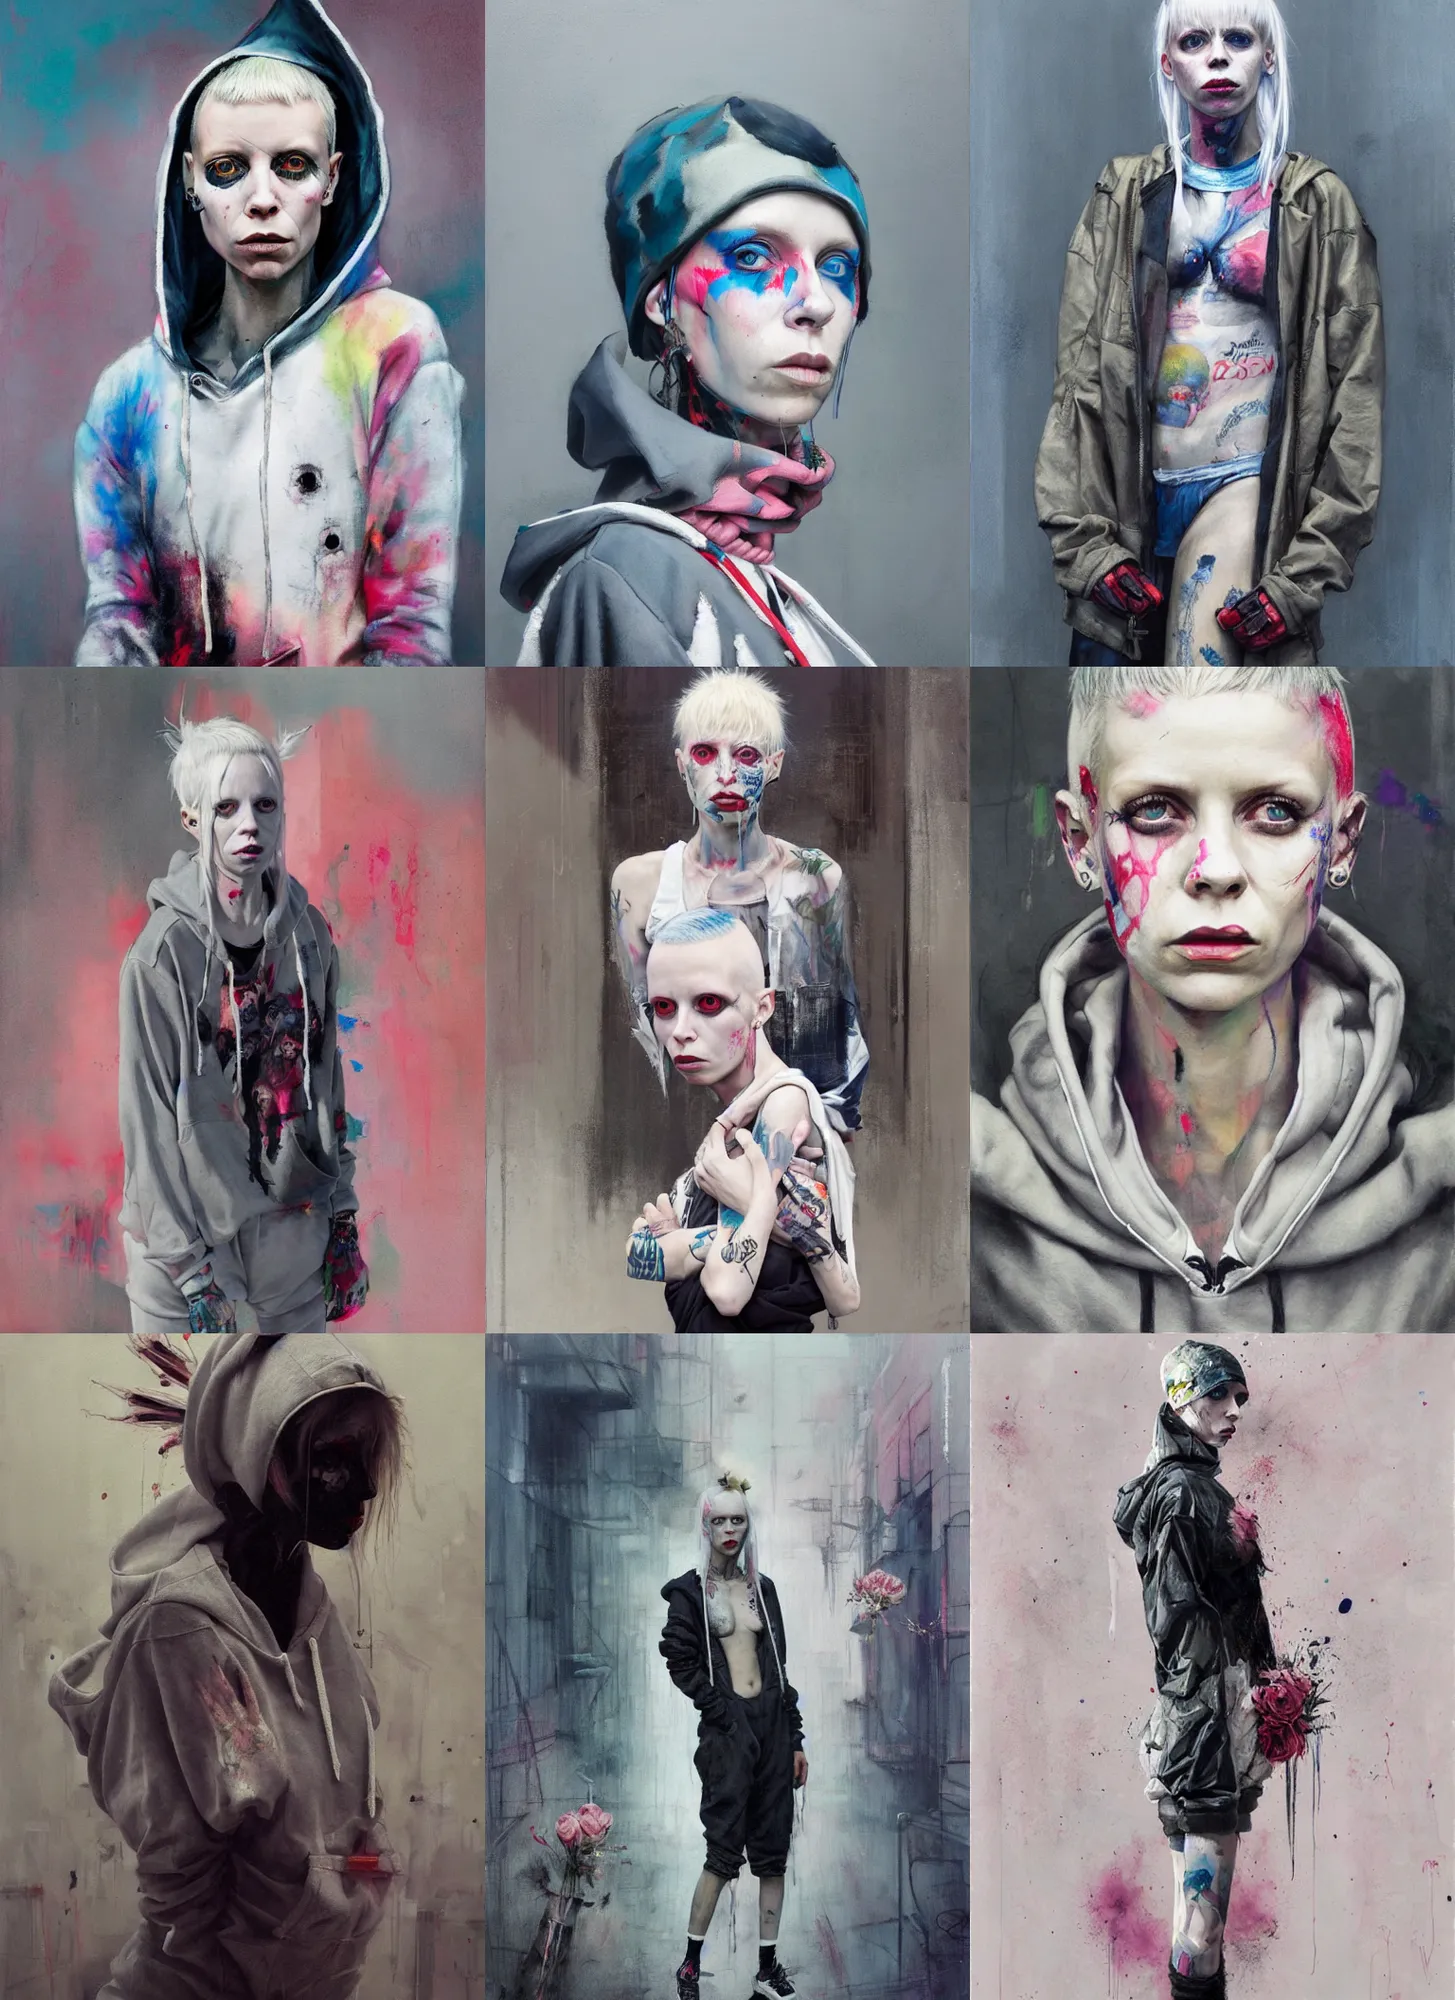 Prompt: painting by martine johanna of yolandi visser wearing a hoodie standing in a township street in the style of jeremy mann, street clothing, haute couture fashion, full figure painting by tom bagshaw, ashley wood, david choe, decorative flowers, pastel palette, die antwoord